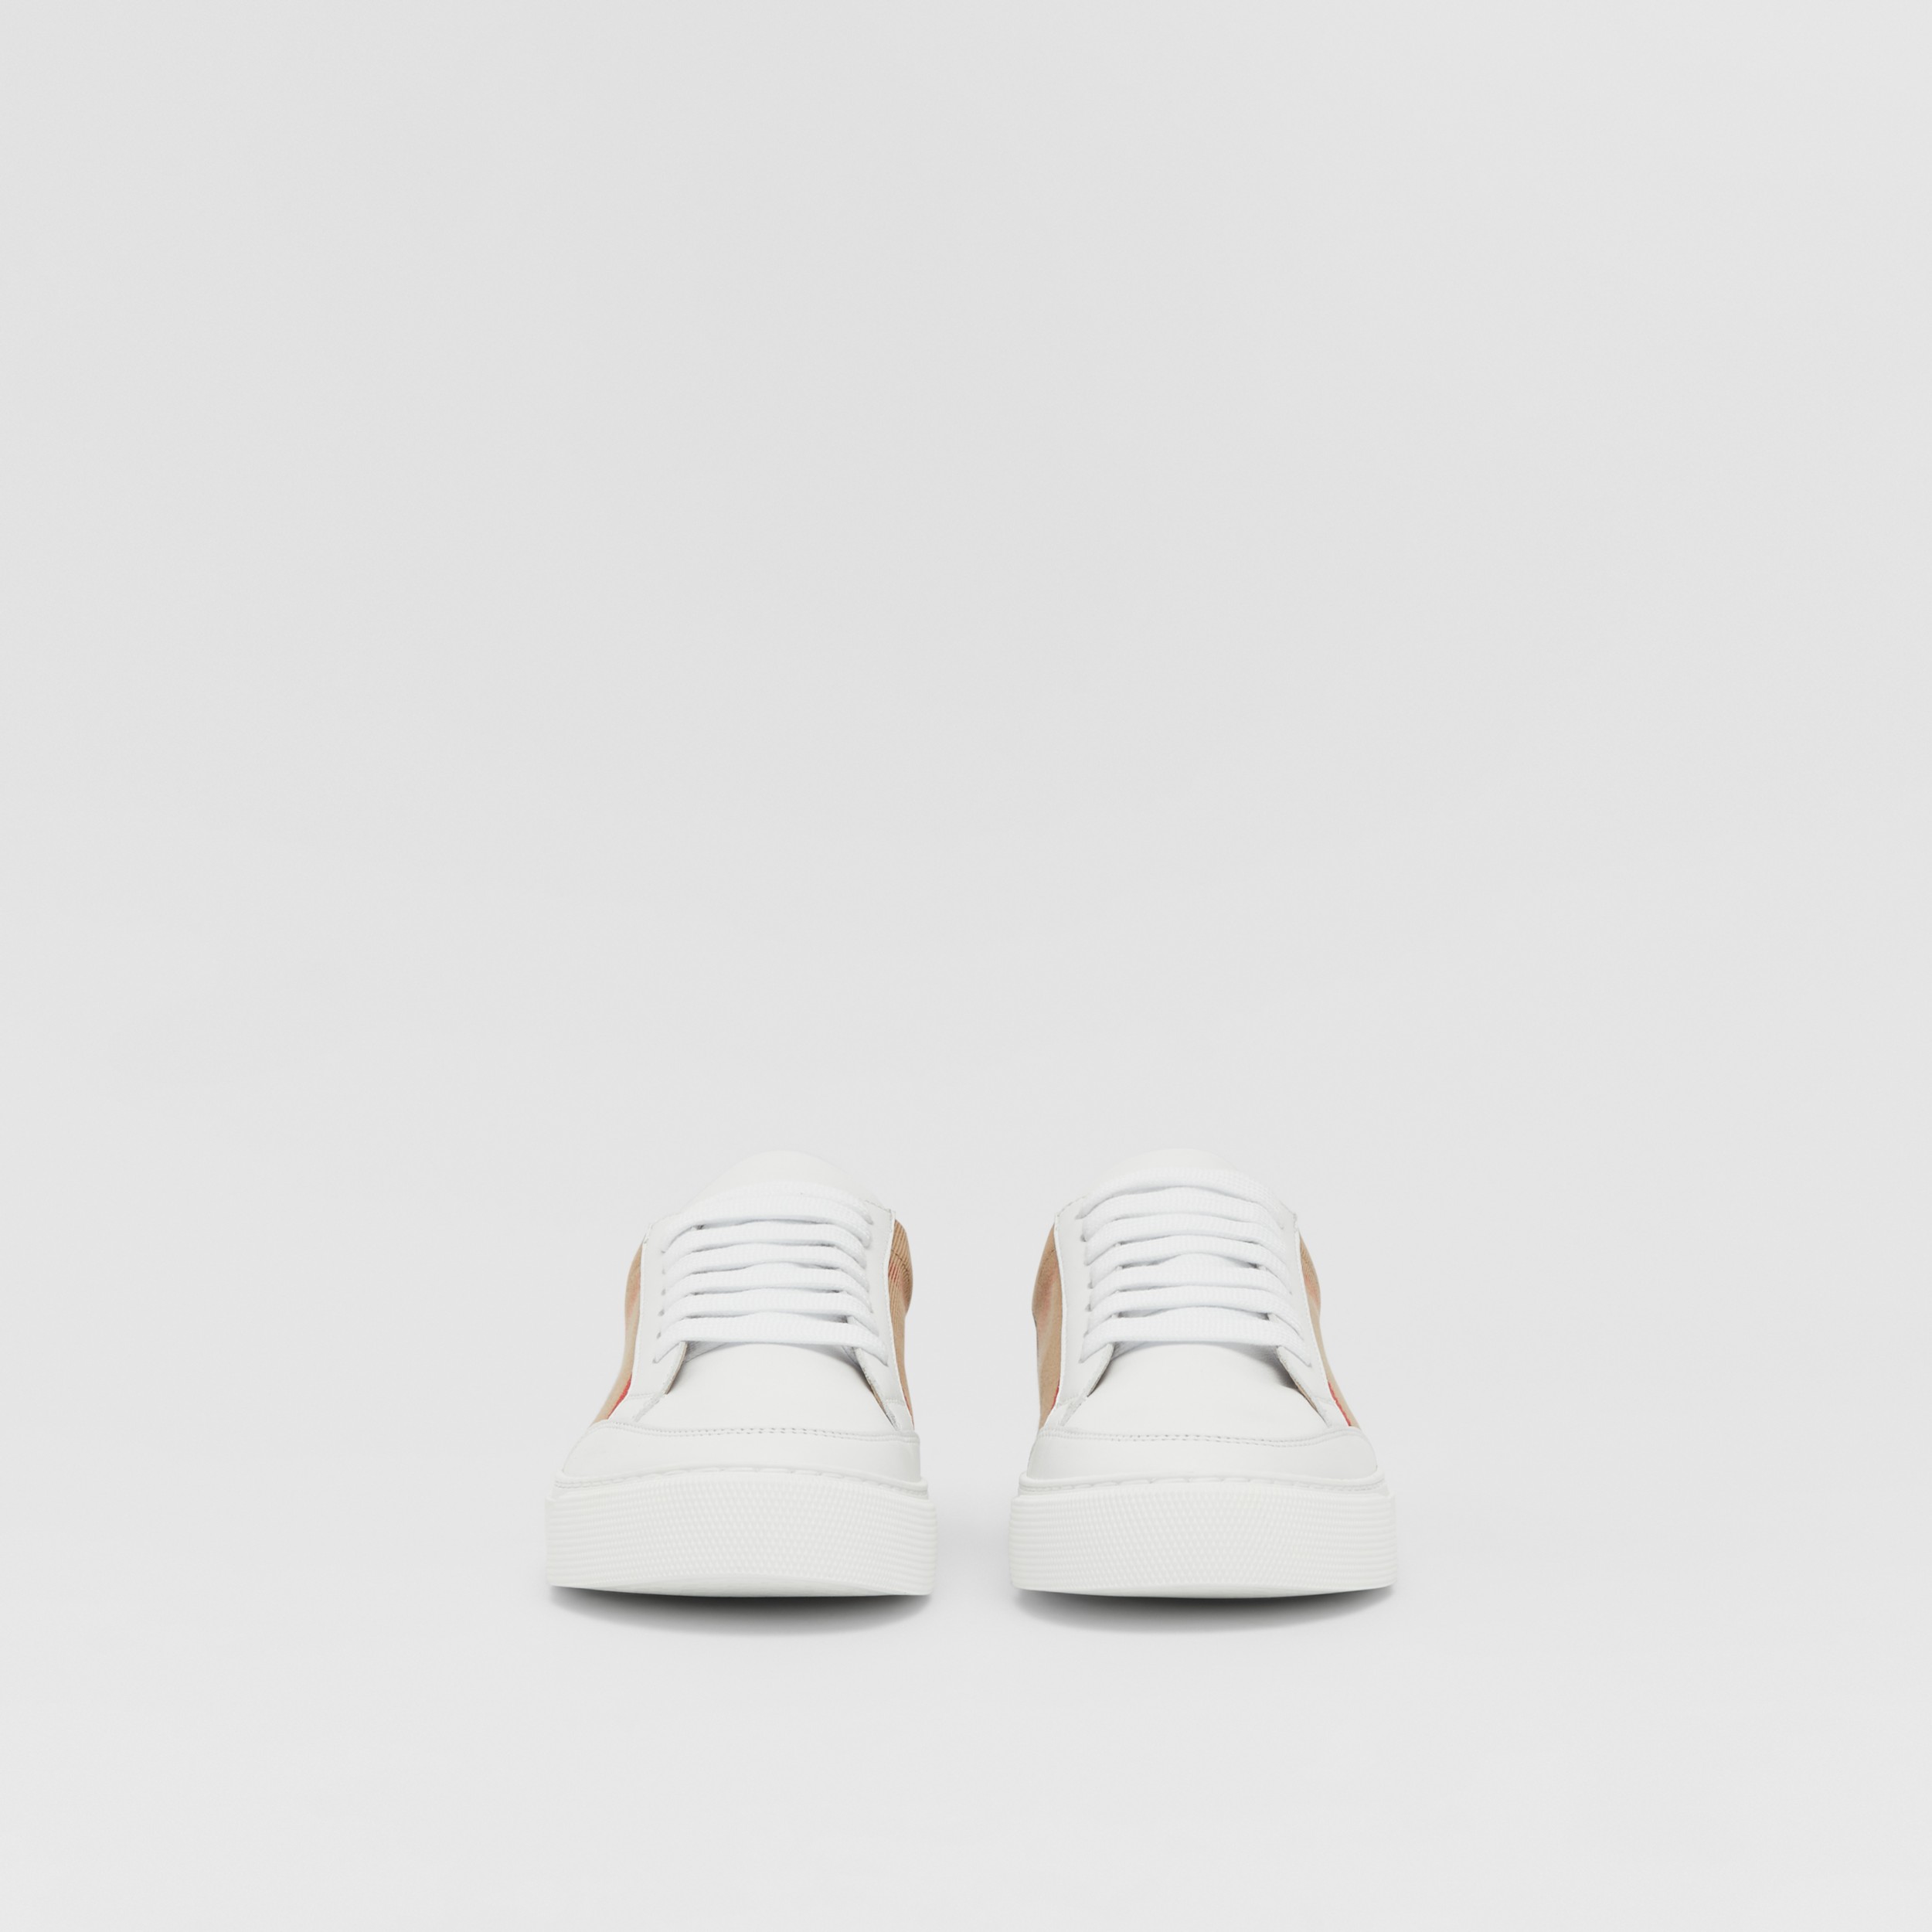 Arriba 37+ imagen burberry white leather sneakers